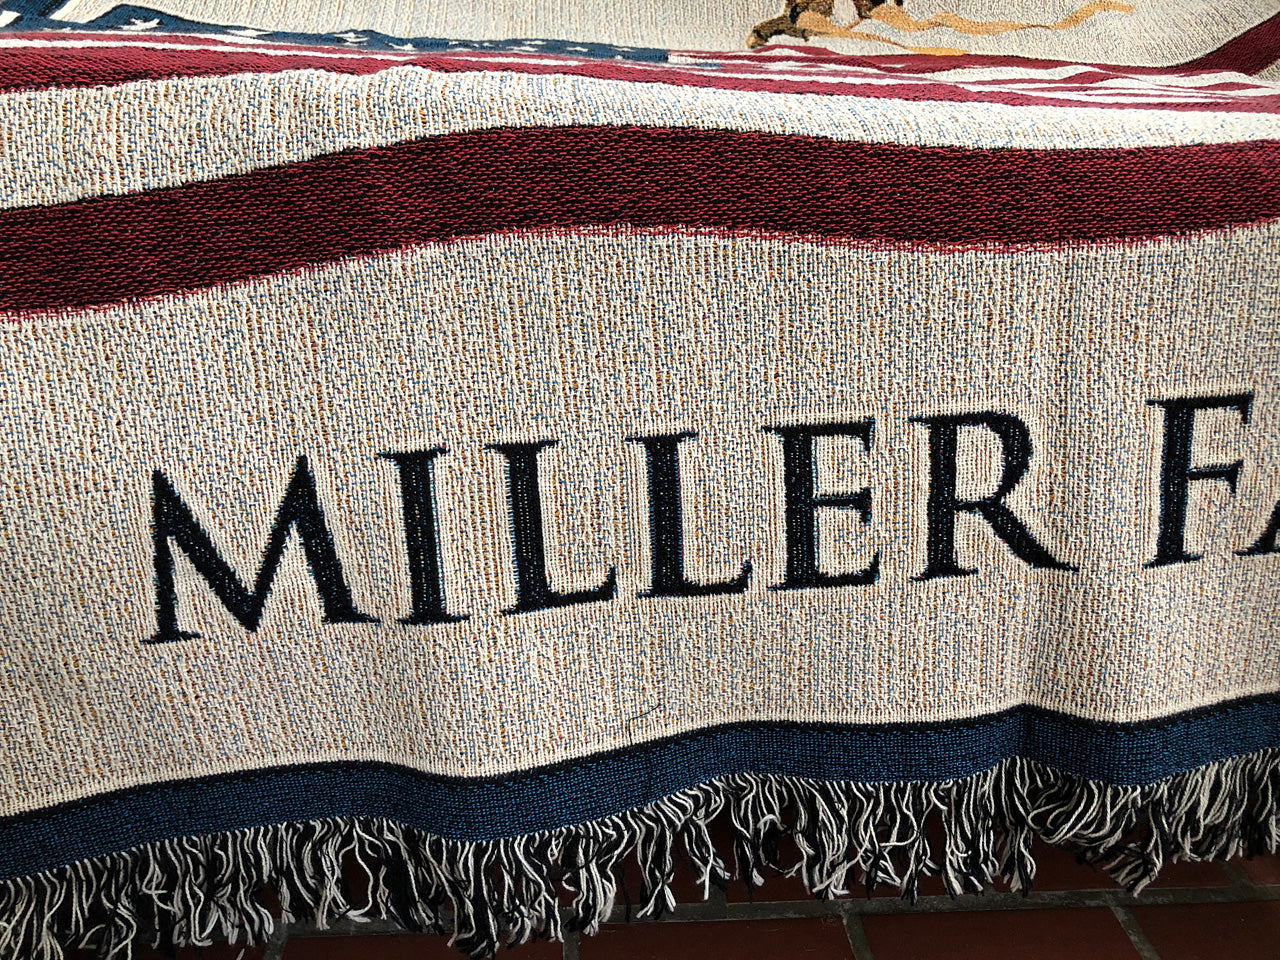 Personalized American Family Flag Woven Blanket